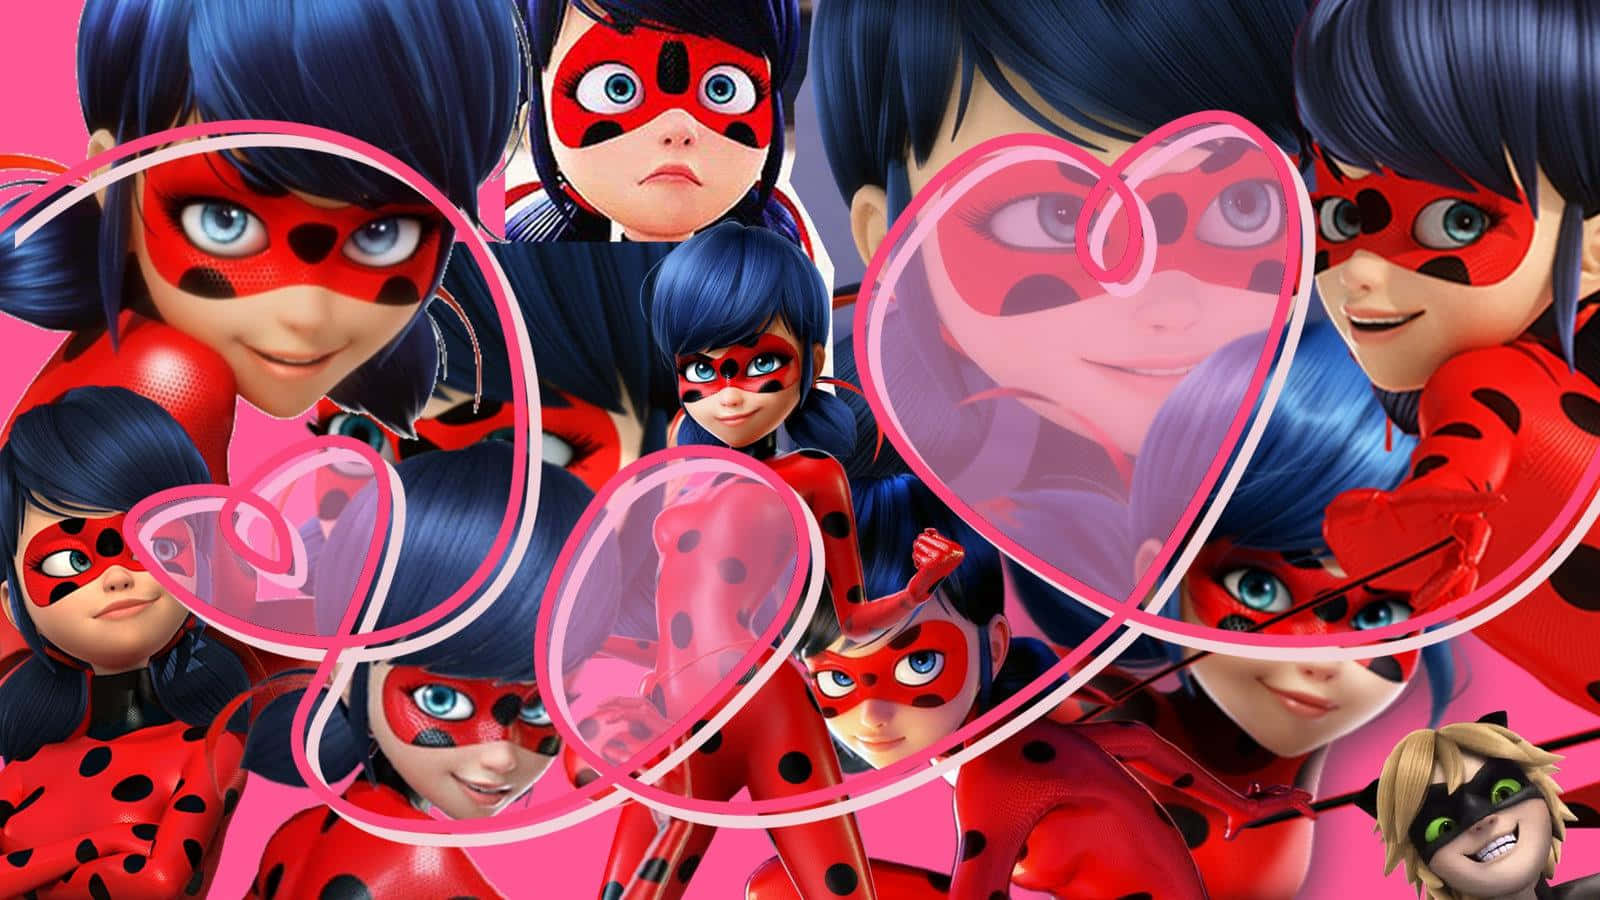 Marinette and Ladybug standing together to fight evil.